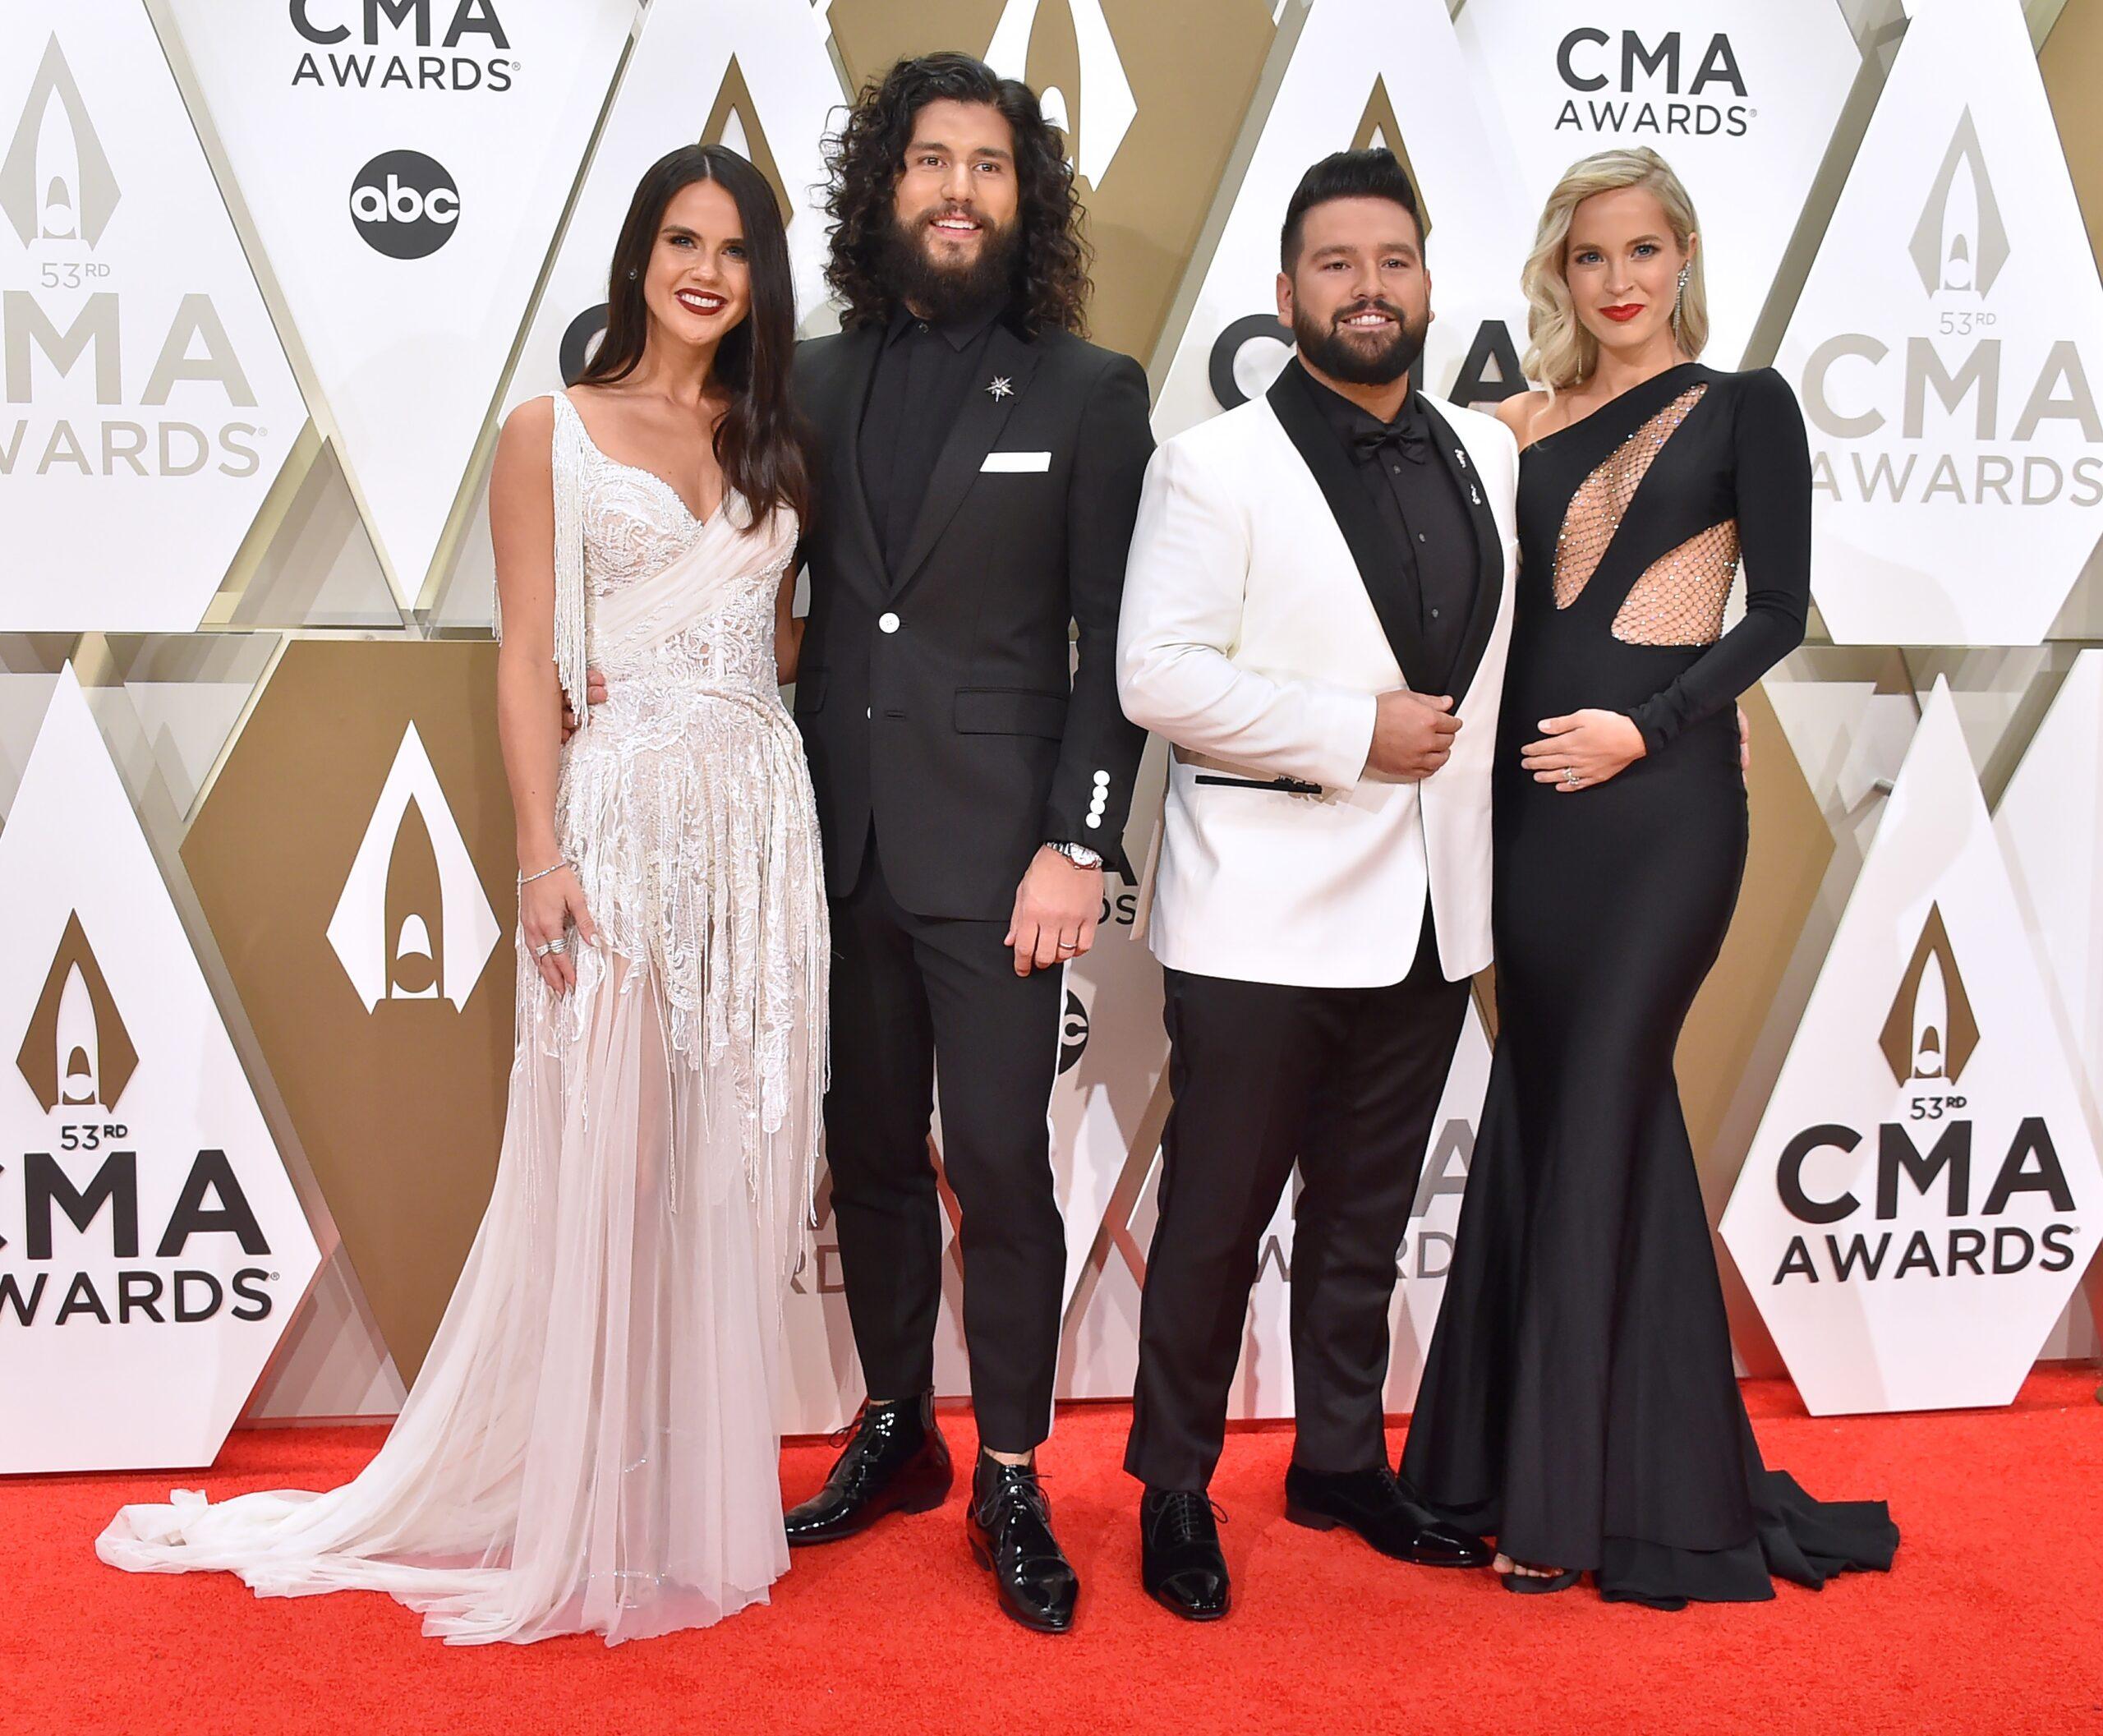 Dan and Shay The 53rd Annual CMA Awards - Arrivals